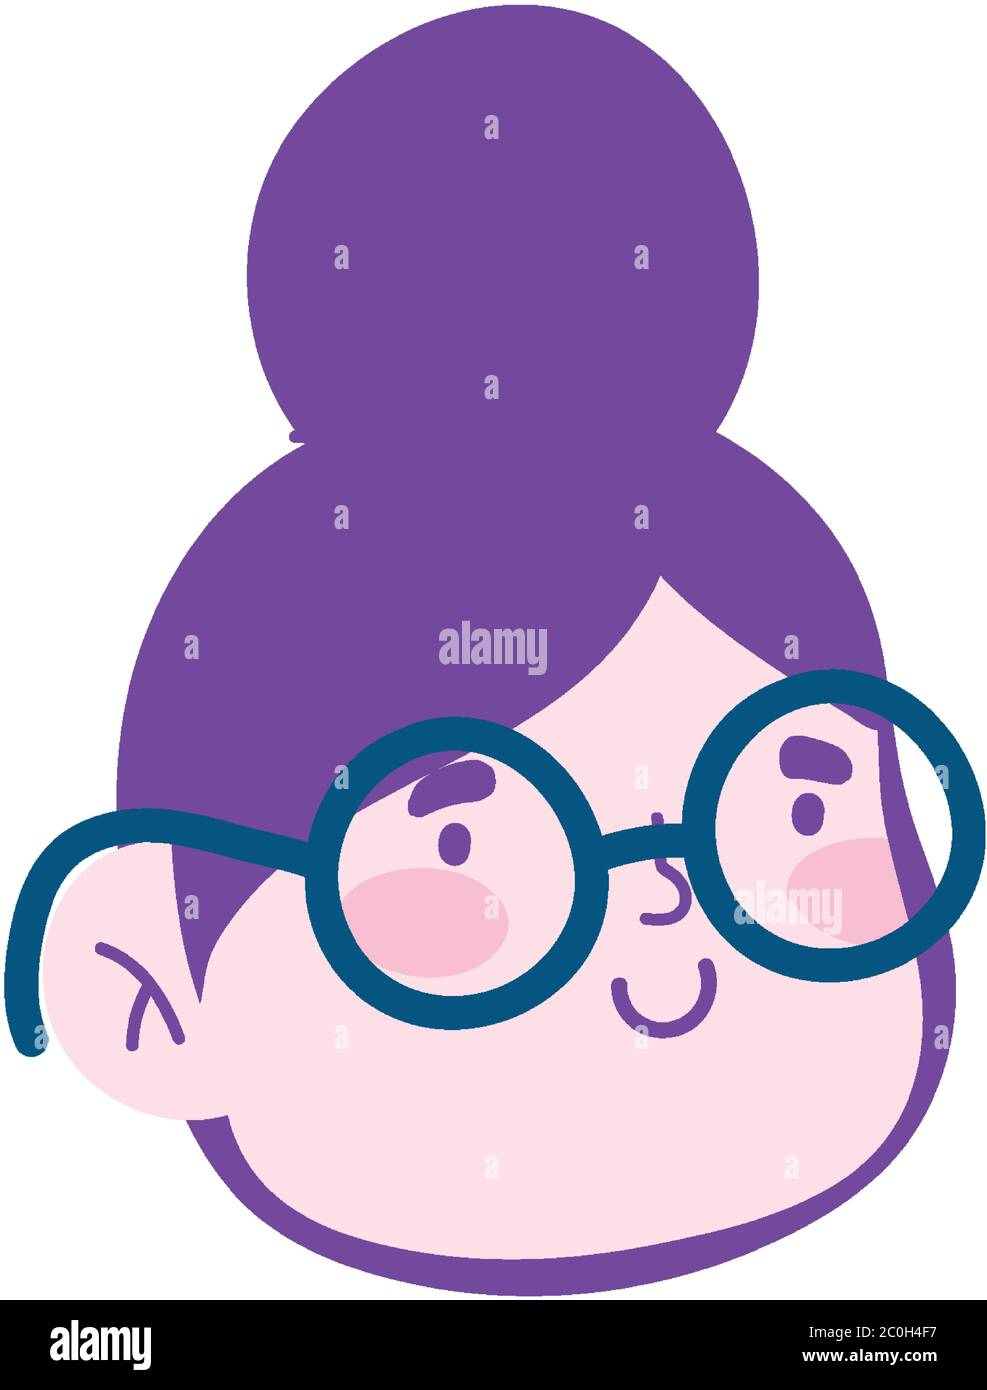 woman with glasses face cartoon character isolated icon design white background vector illustration Stock Vector